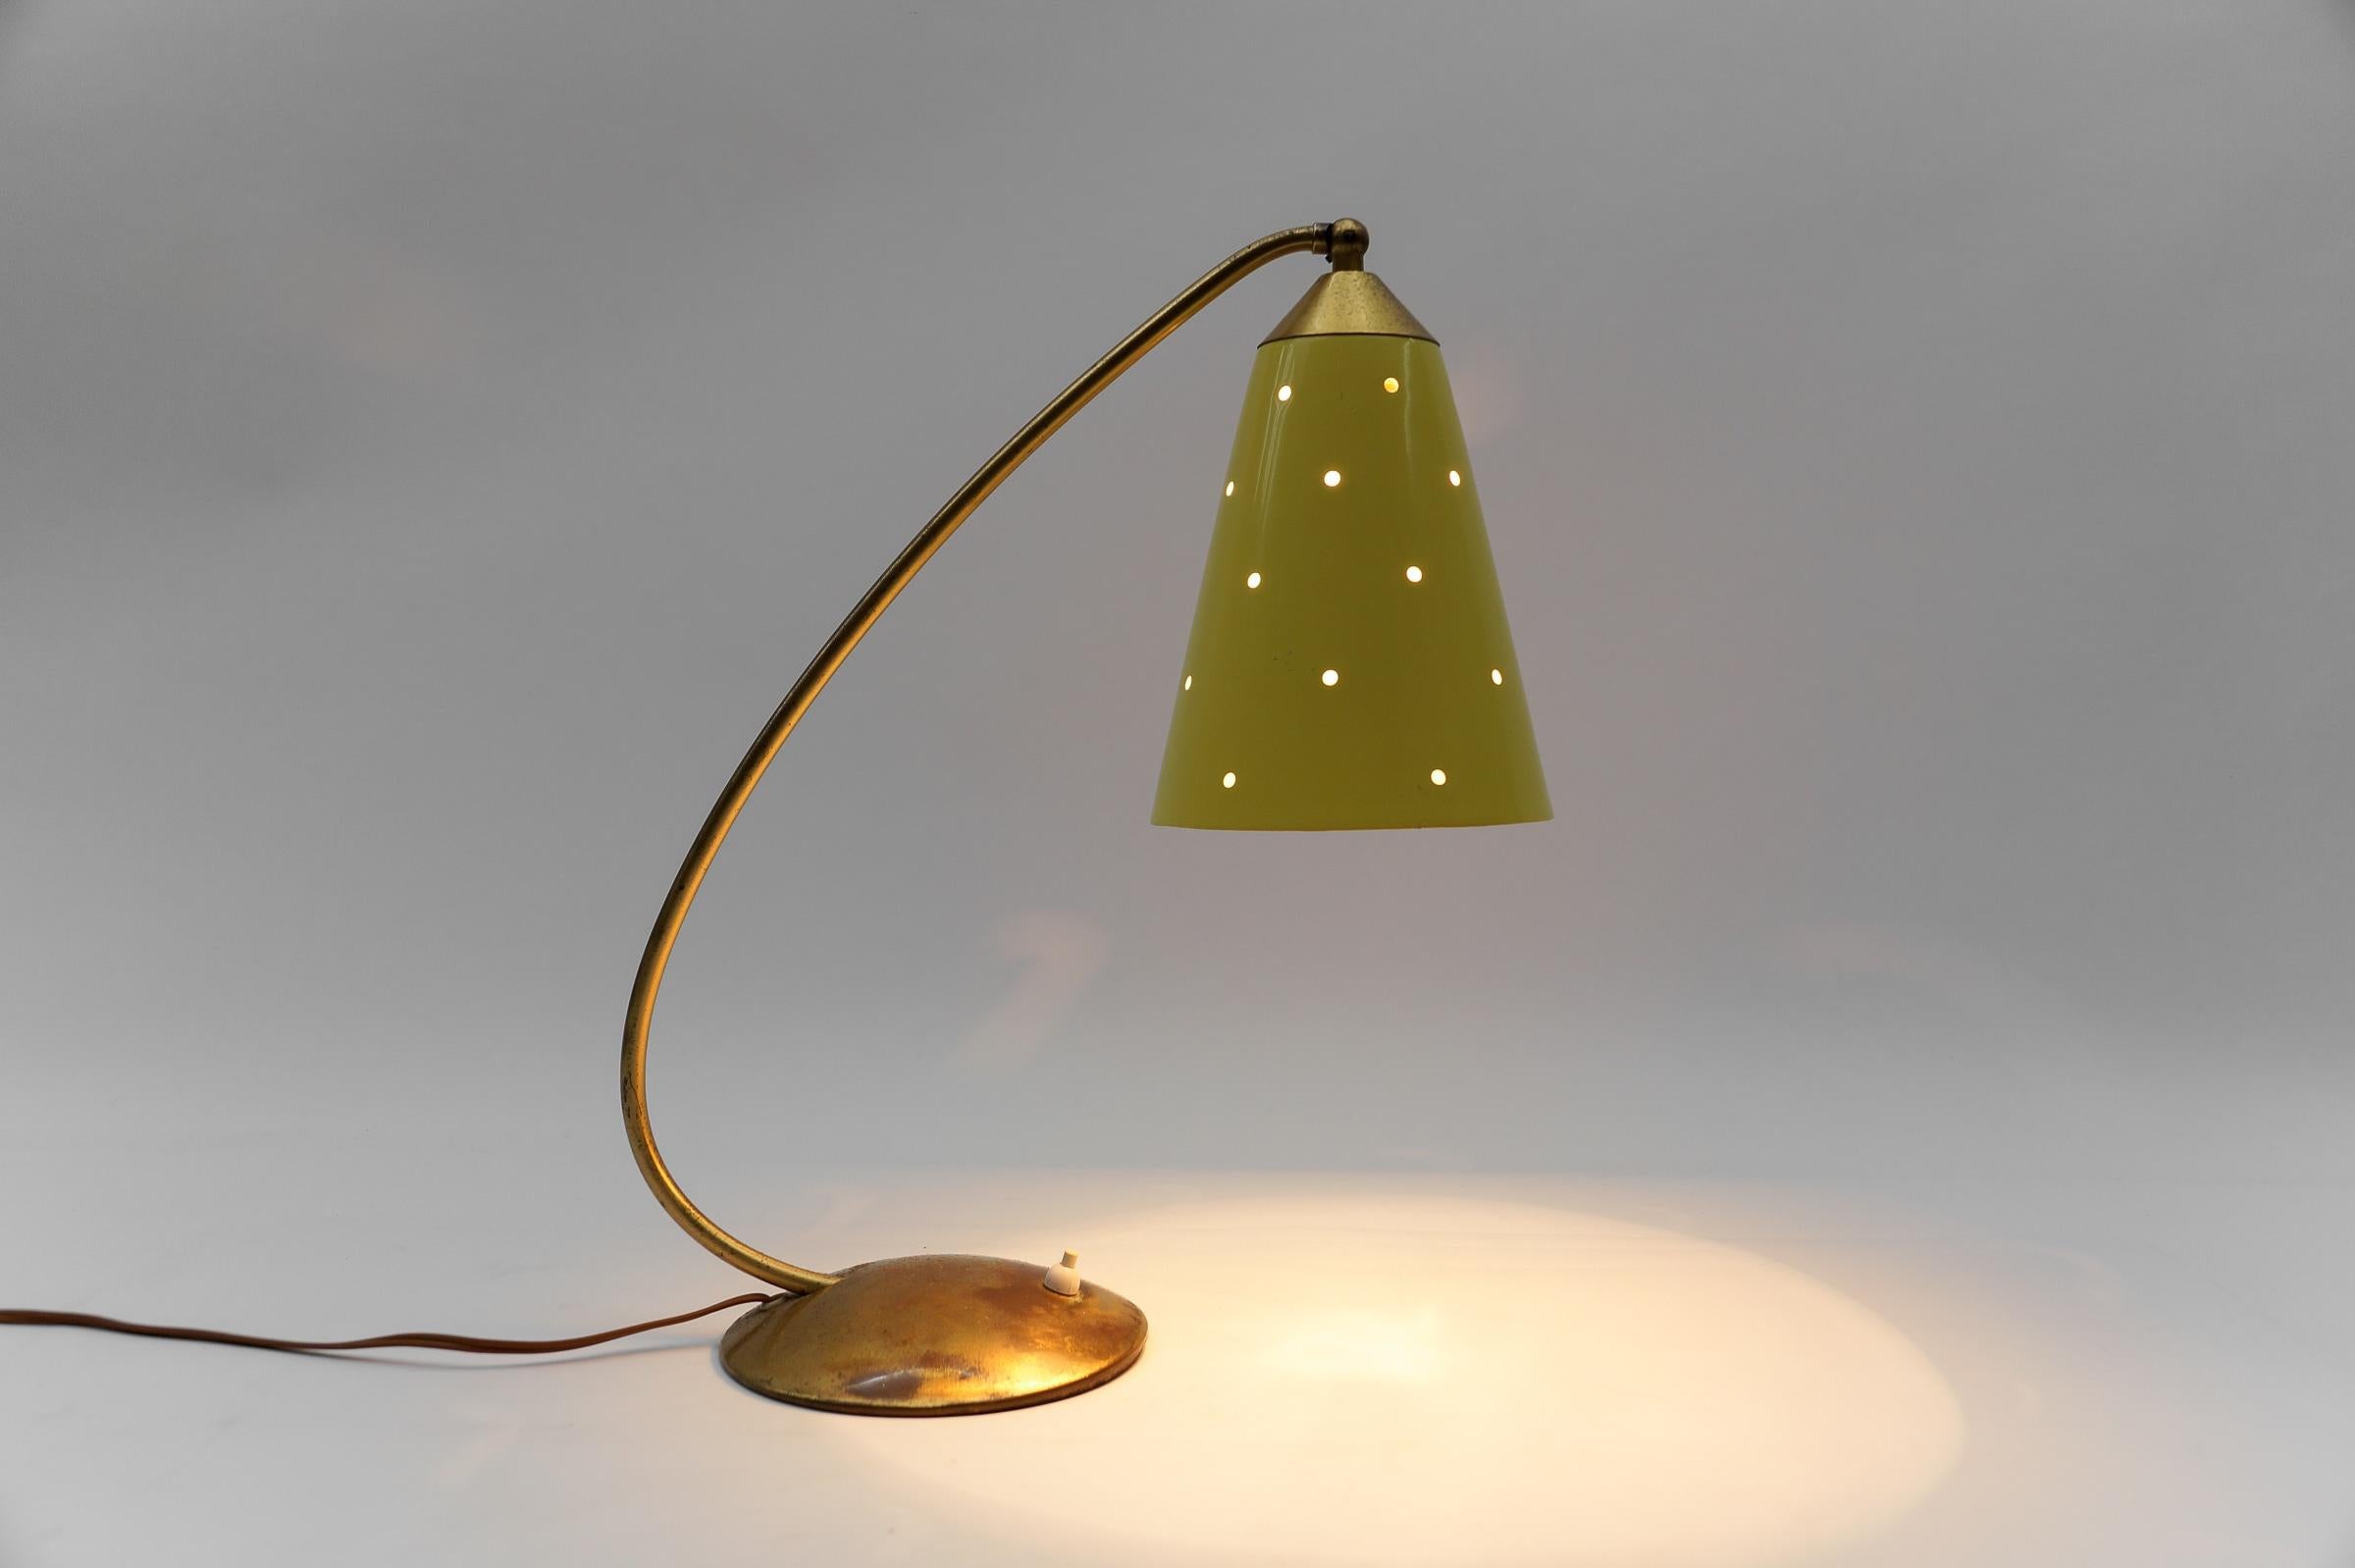 Metal Beautiful Mid-Century Modern Table Lamp in Brass, 1950s Germany For Sale